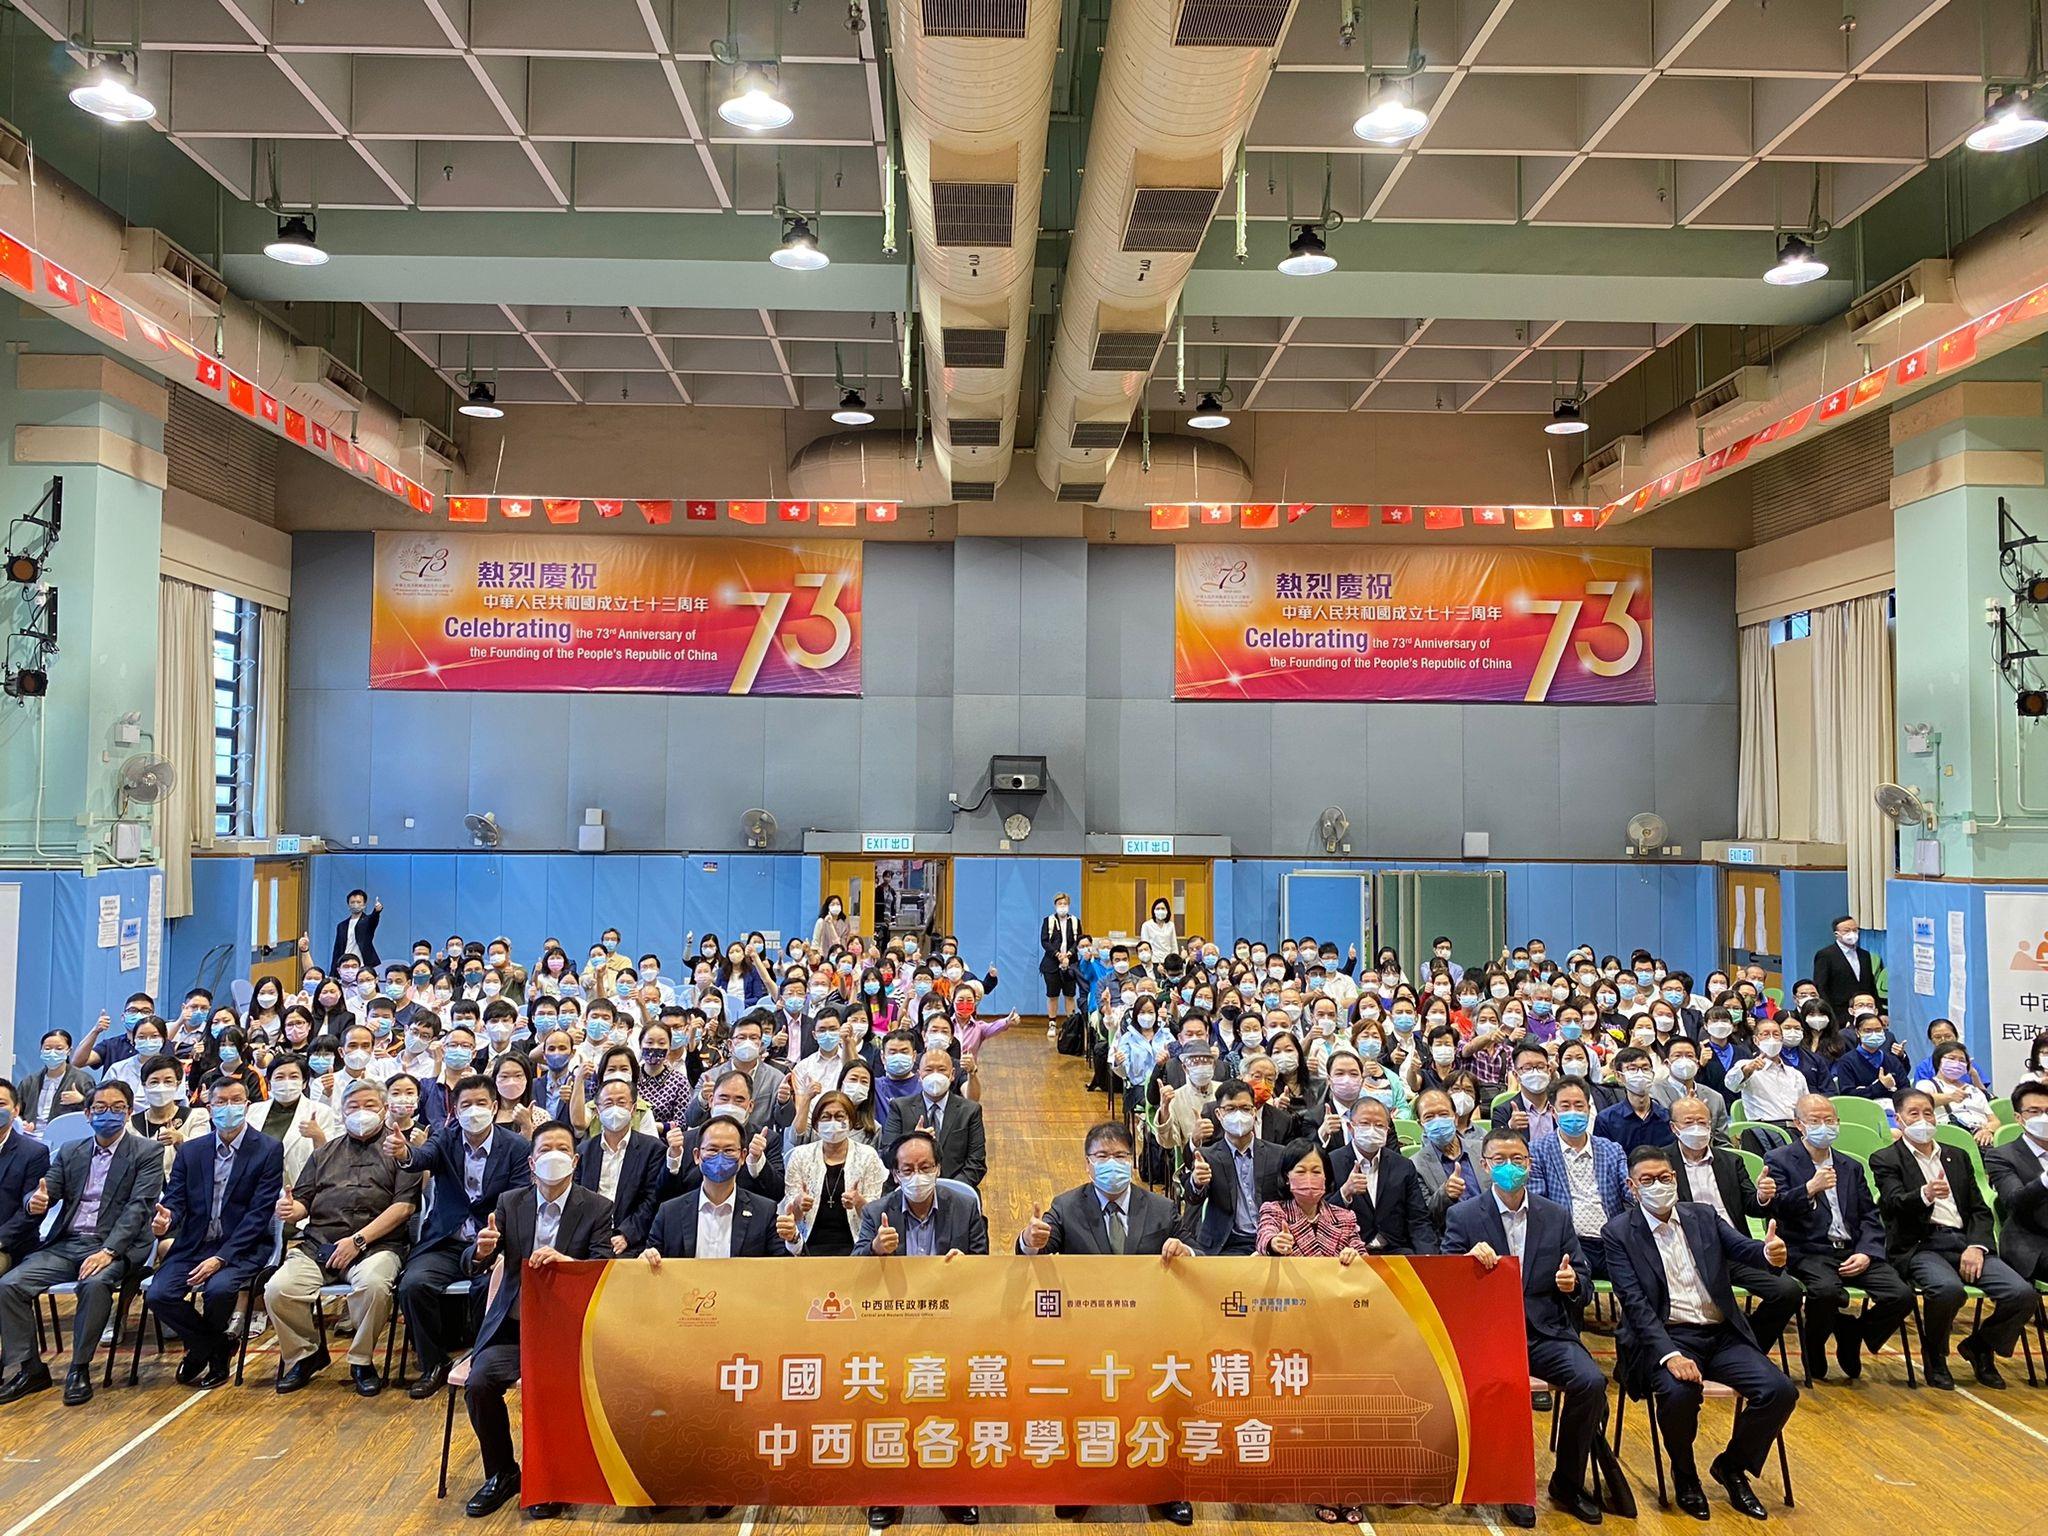 The Central and Western District Office, together with the Association of the Hong Kong Central and Western District and CW Power, today (October 27) held a session on "Essence of the 20th National Congress of the Communist Party of China" at Sai Ying Pun Community Complex Community Hall. Photo shows guests and participants at the session.